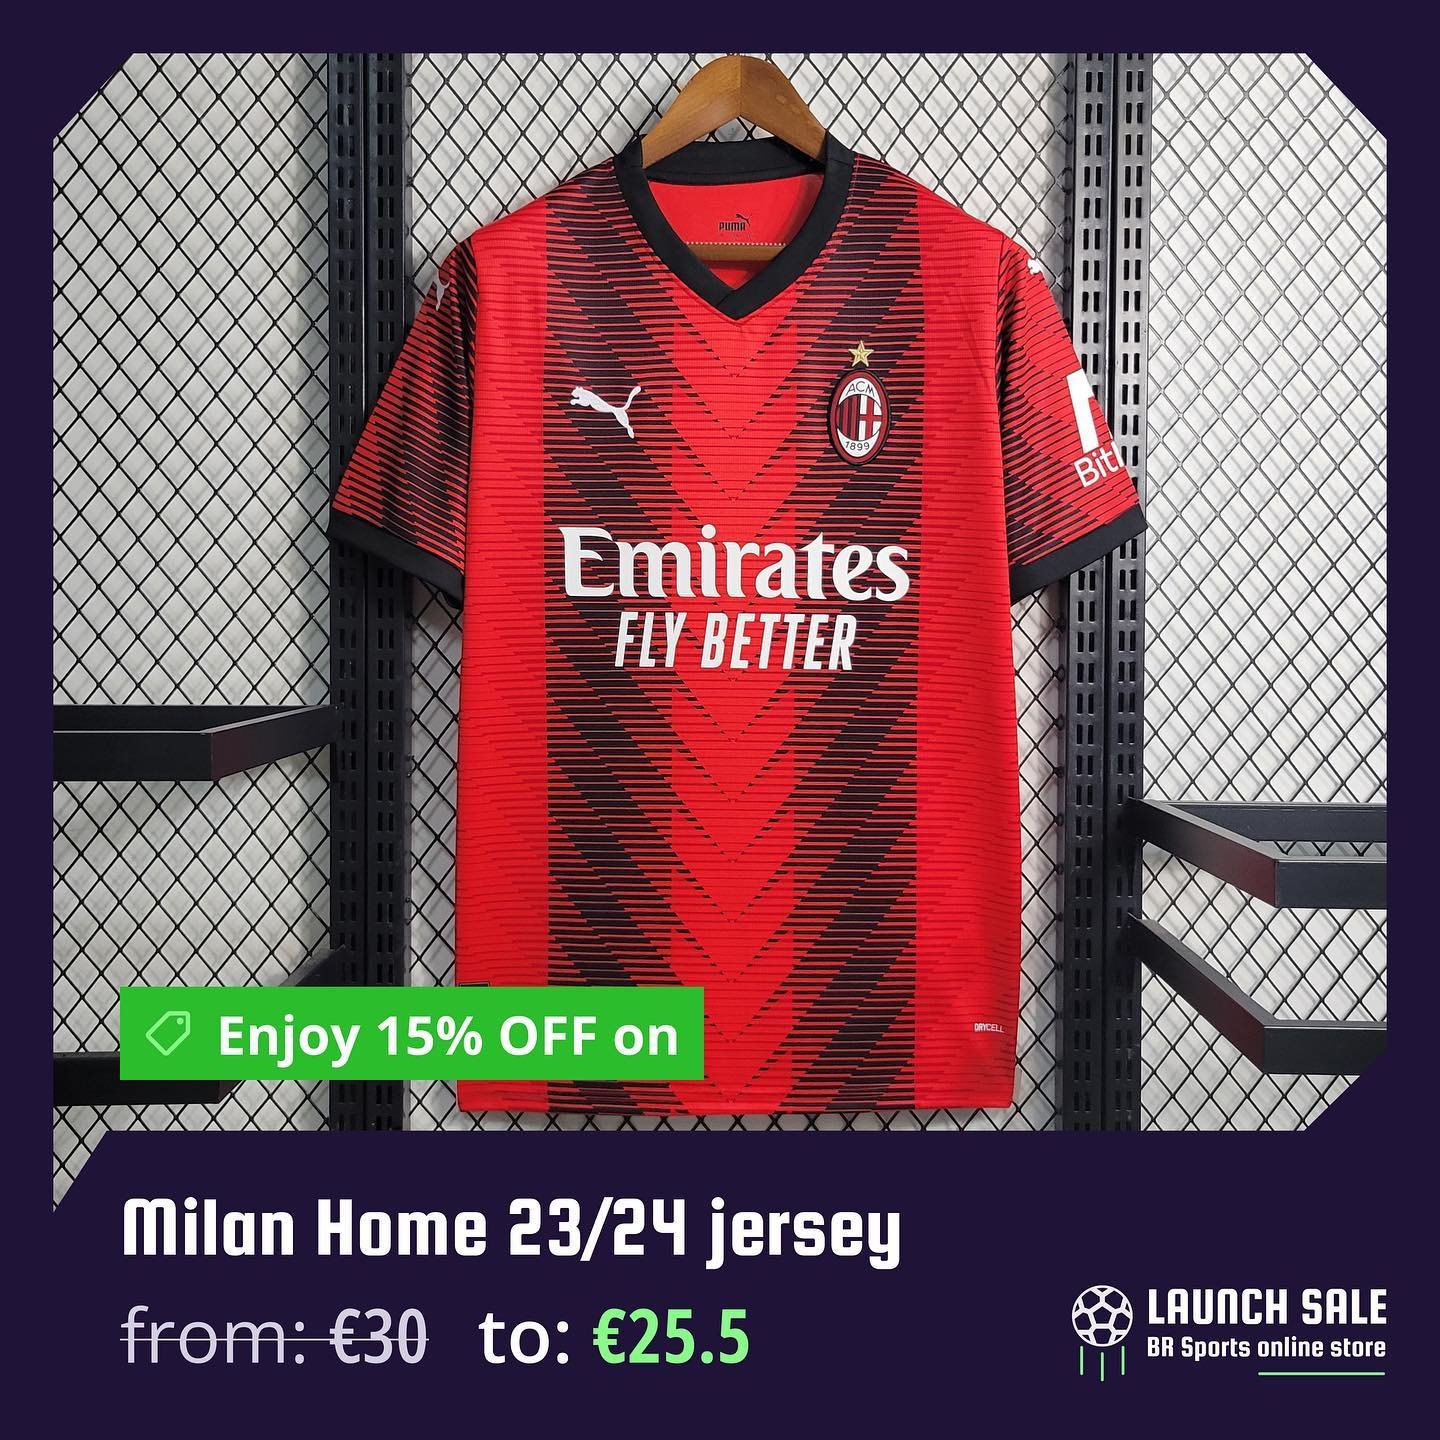 🚀 Launch Sale BR Sports online store

Enjoy 15% OFF on Milan Home 2023/24 jersey
from: &euro;30 - to: &euro;25.5

✍️ Customization: &euro;10
📦 Delivery: &euro;6.9

Click the link in the bio and wear your football love!

*The discount will be applie